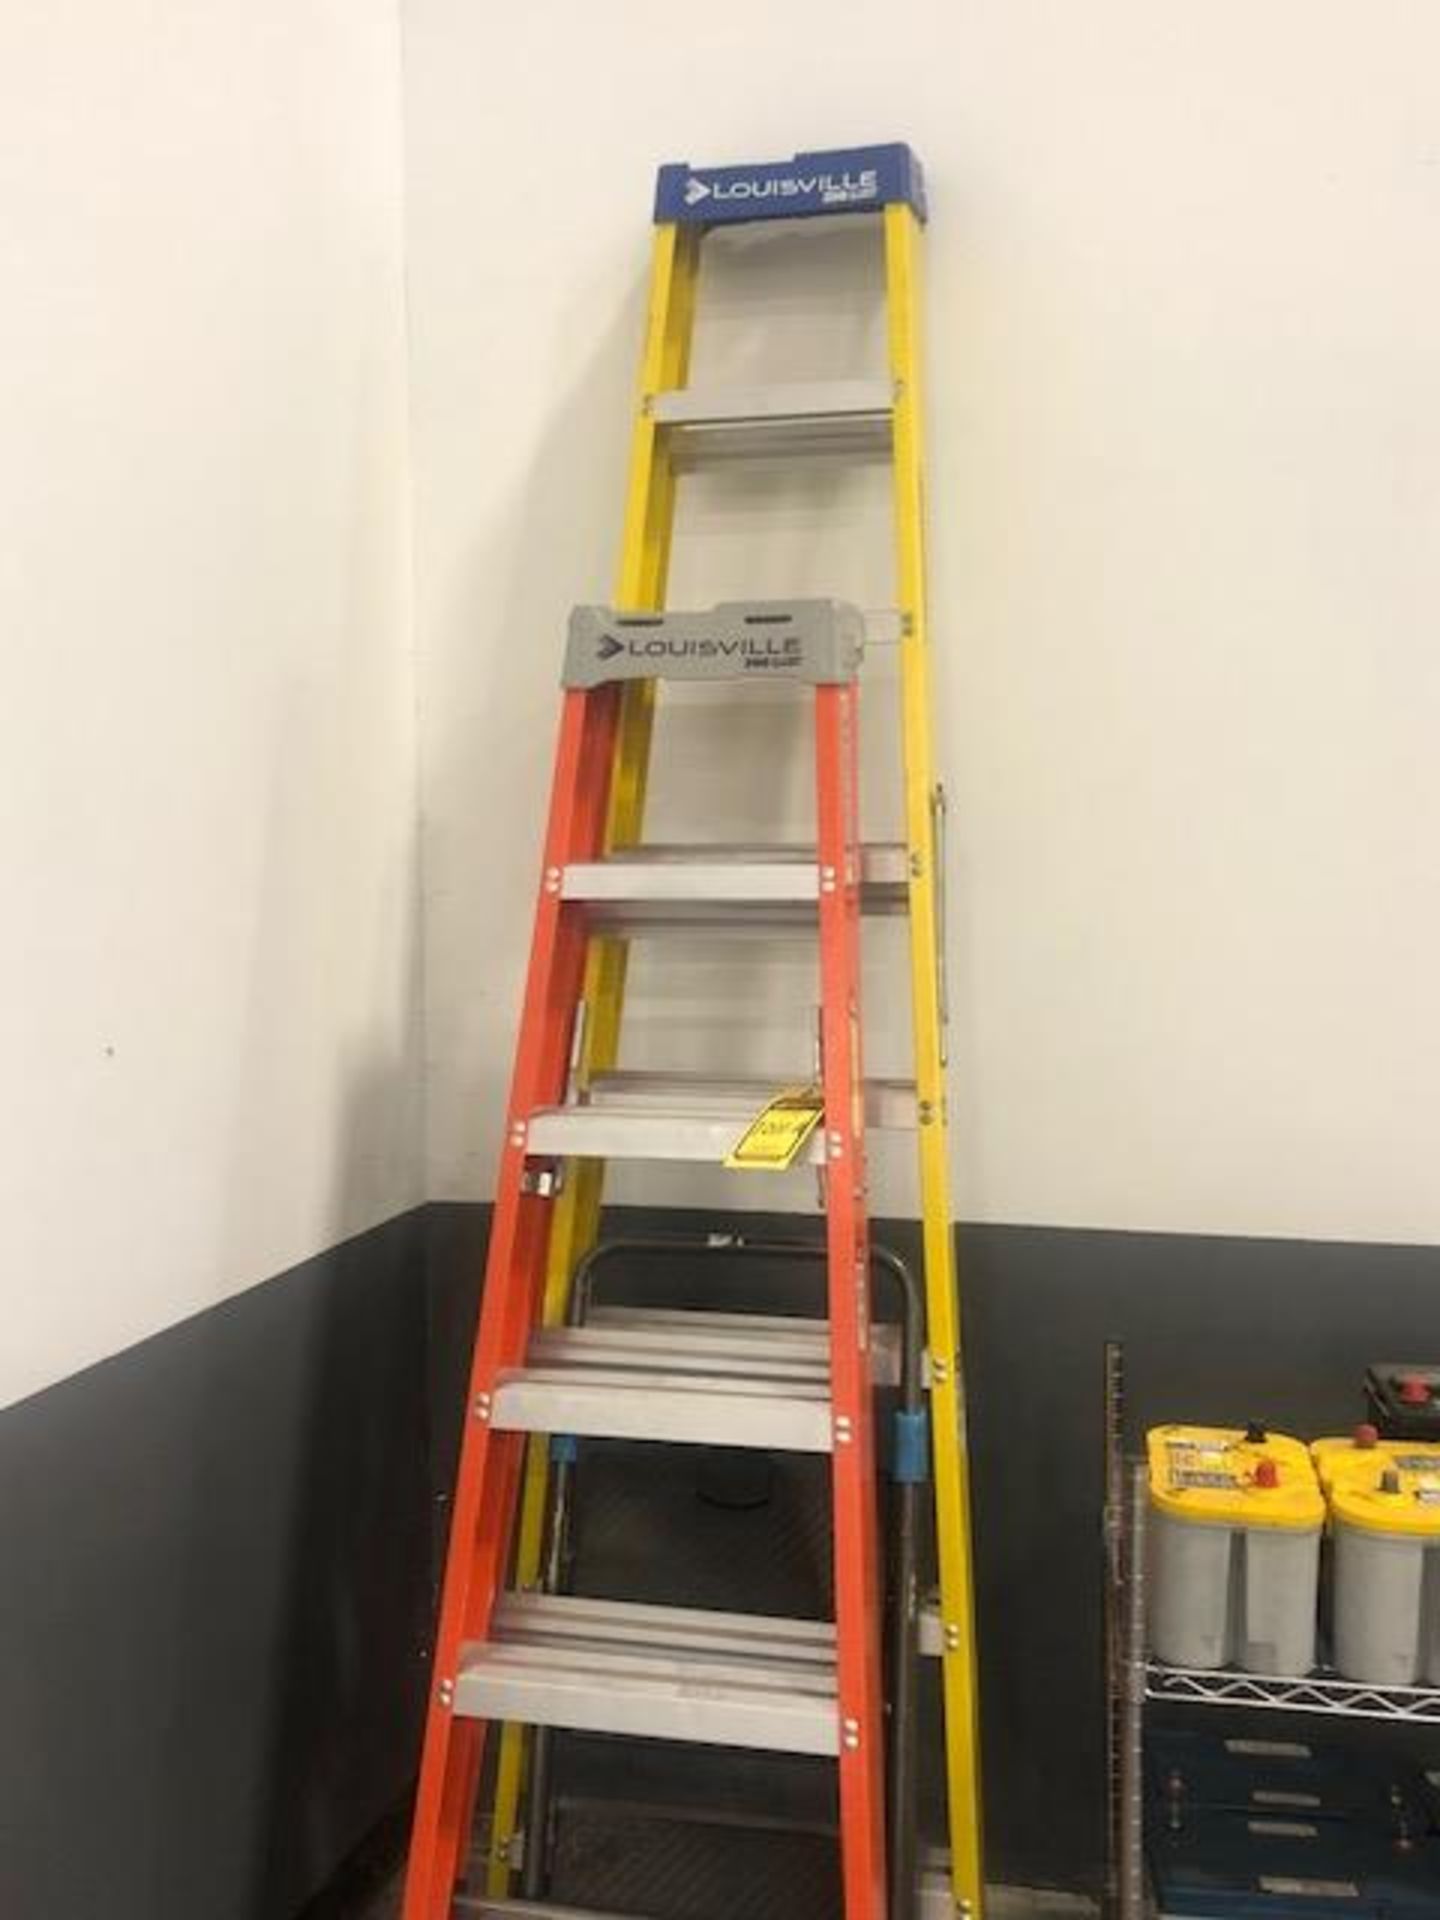 LOUISVILLE 6' LADDER, 300 LB CAPACITY, AND LOUISVILLE 8' LADDER, 250 LB CAPACITY